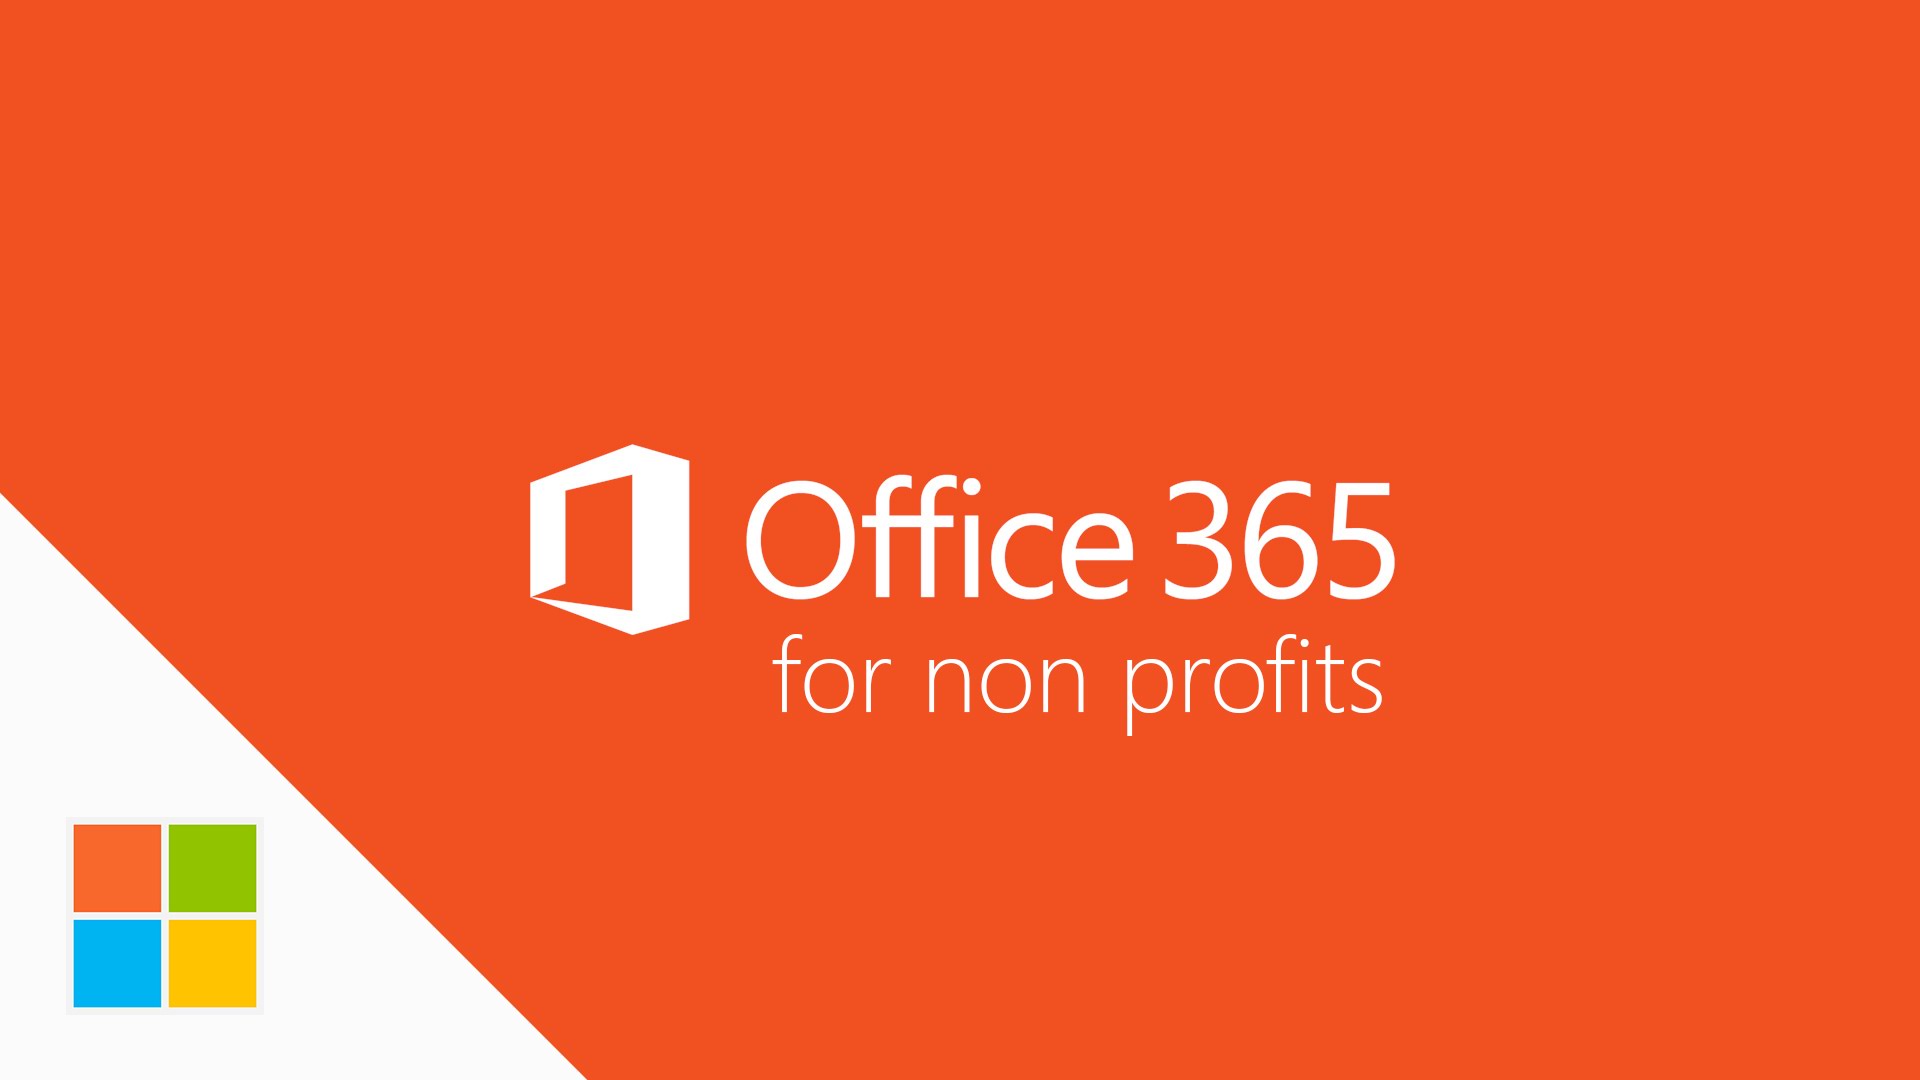 Microsoft Office 365 Nonprofit plans and pricing